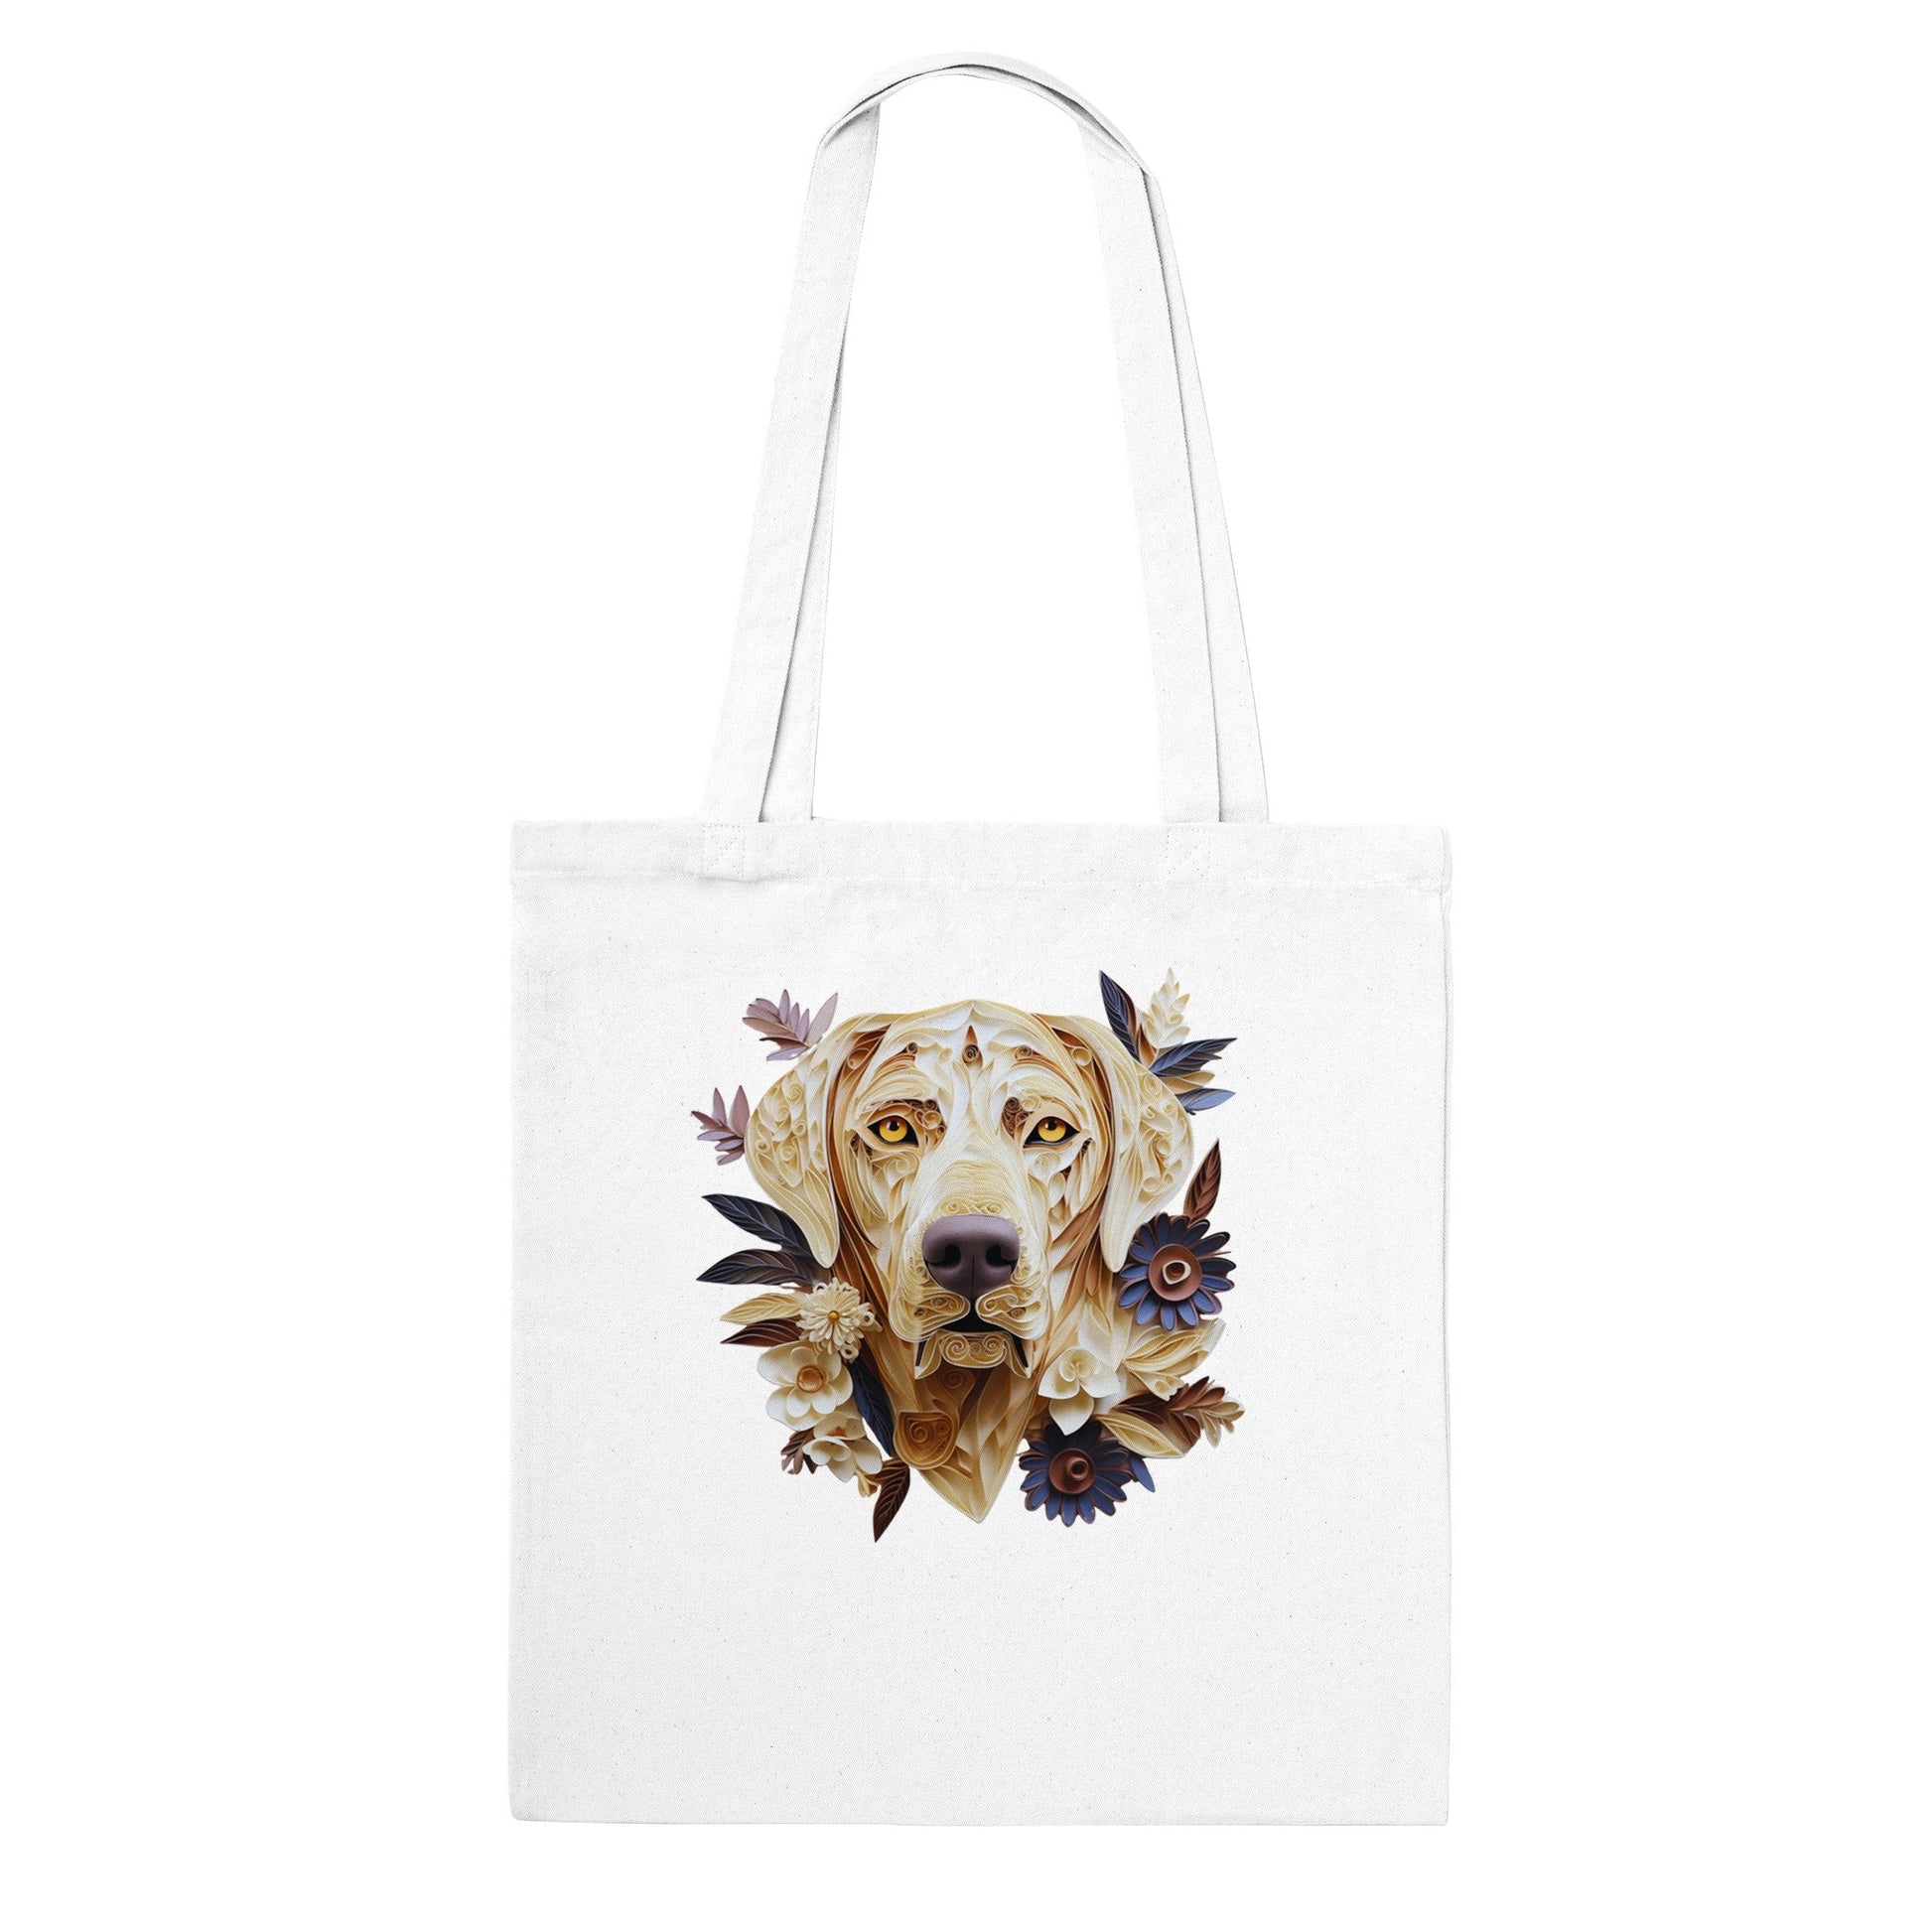 100% Cotton Classic Tote Bag featuring Quilled Labrador Design - Hobbster